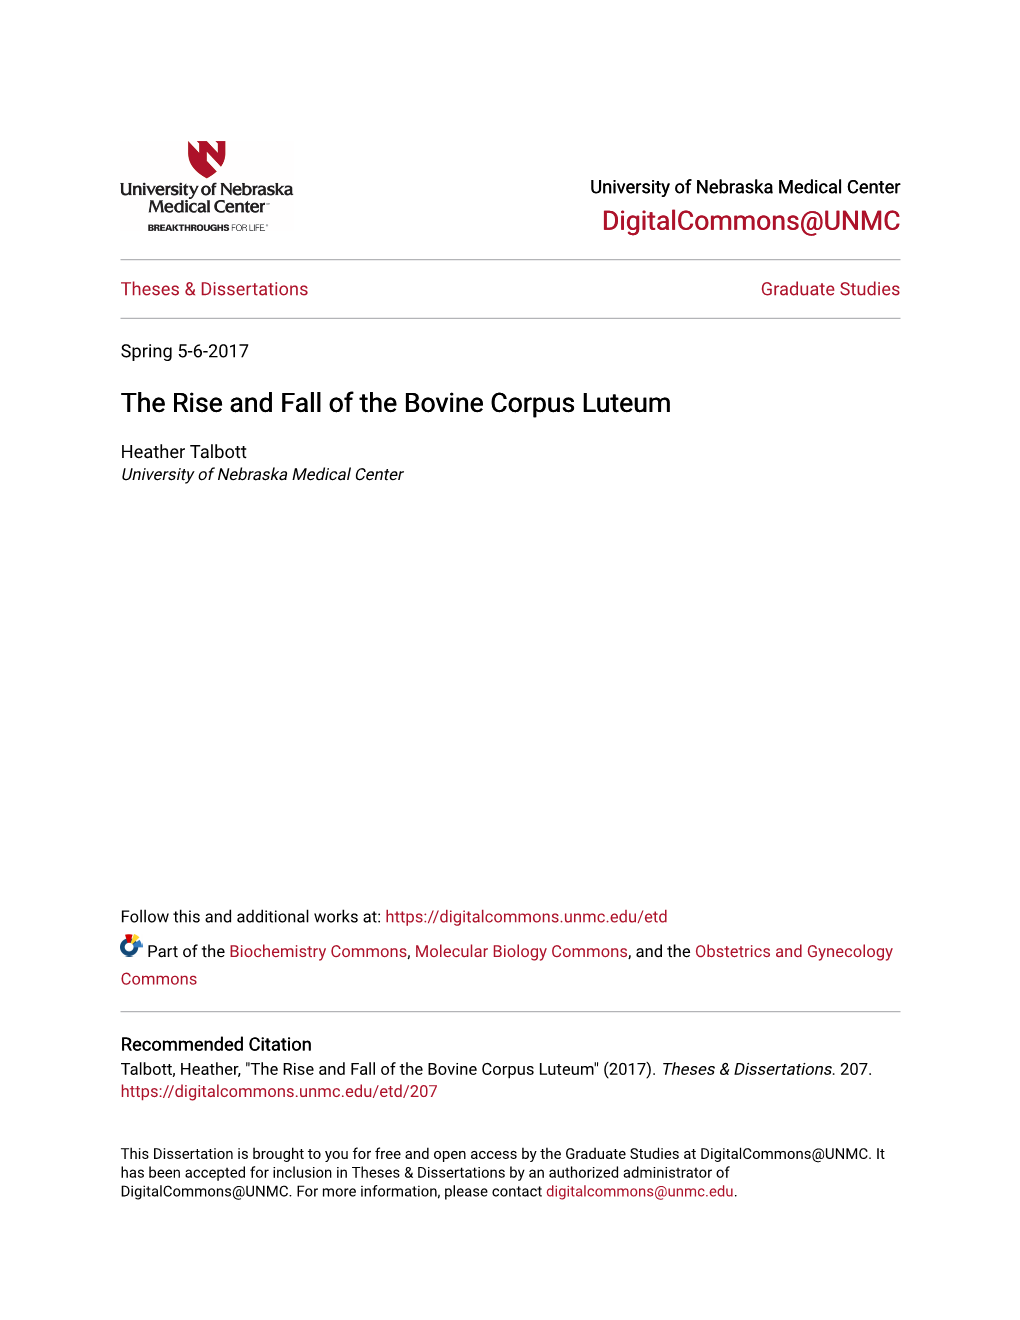 The Rise and Fall of the Bovine Corpus Luteum